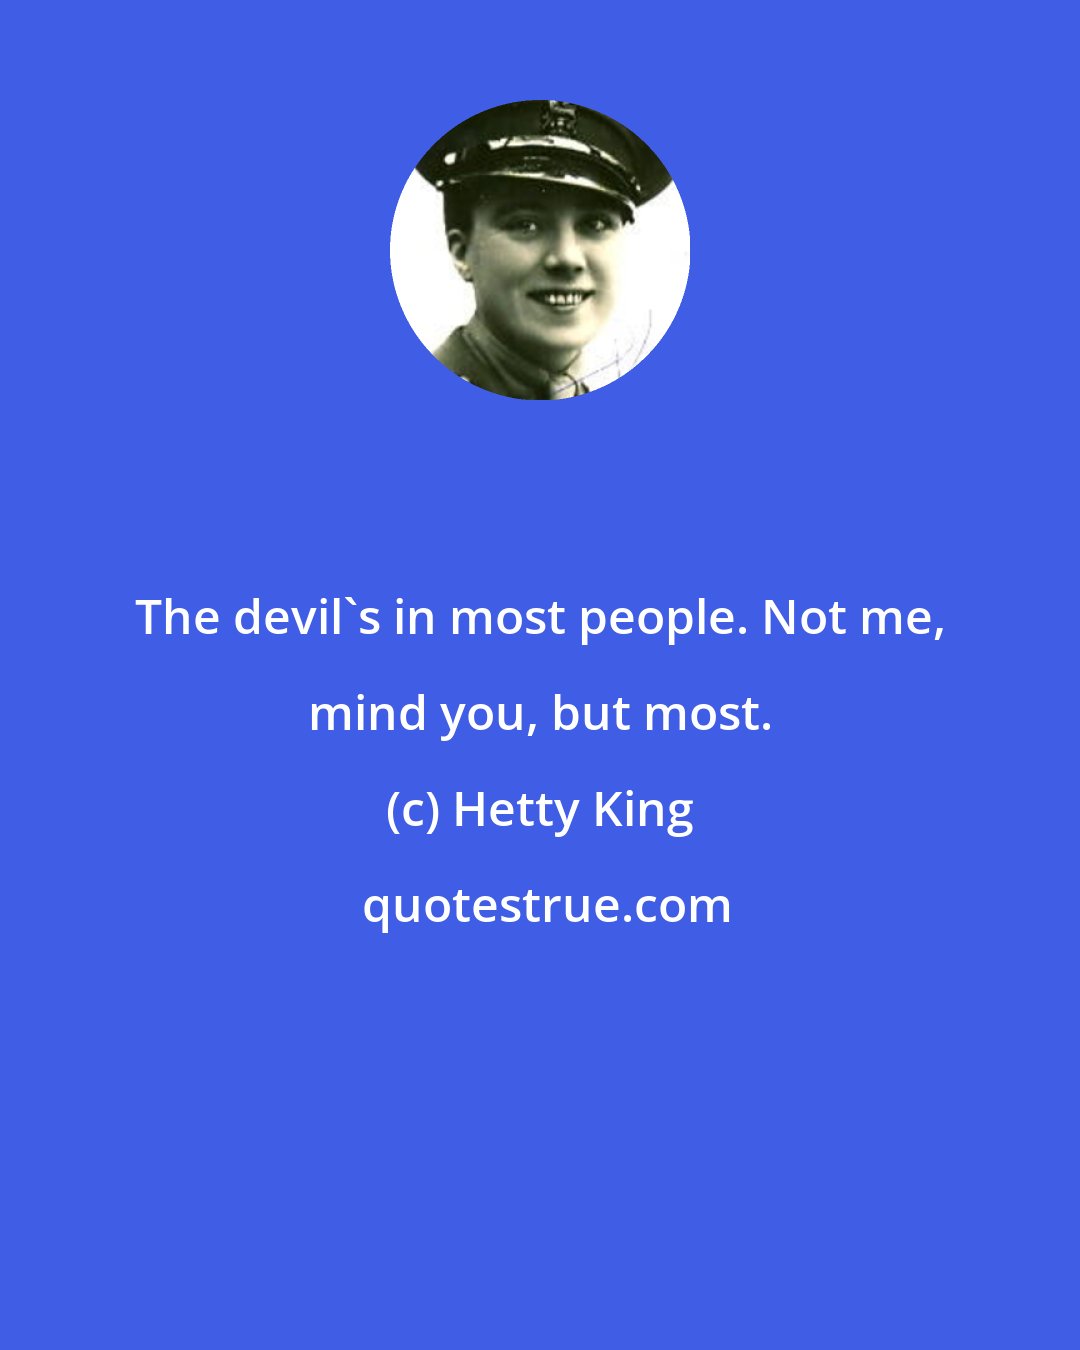 Hetty King: The devil's in most people. Not me, mind you, but most.